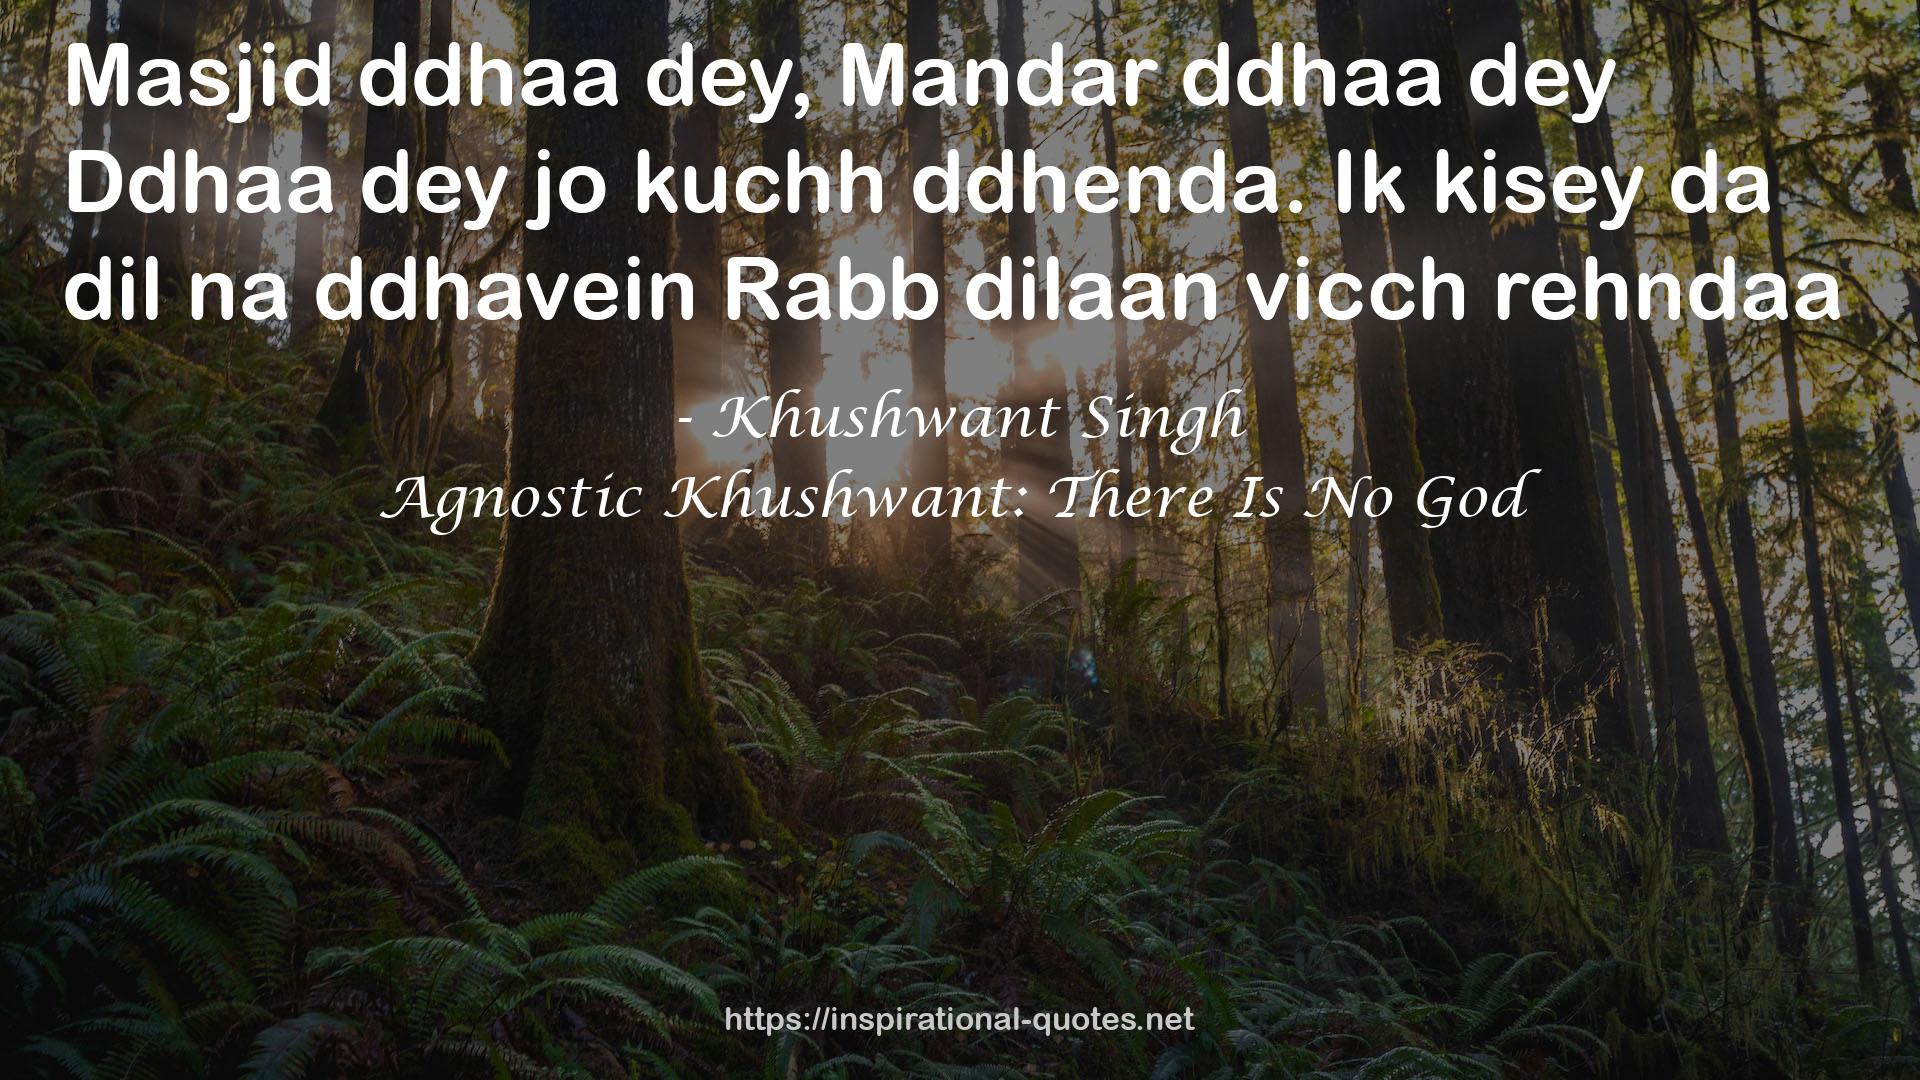 Agnostic Khushwant: There Is No God QUOTES